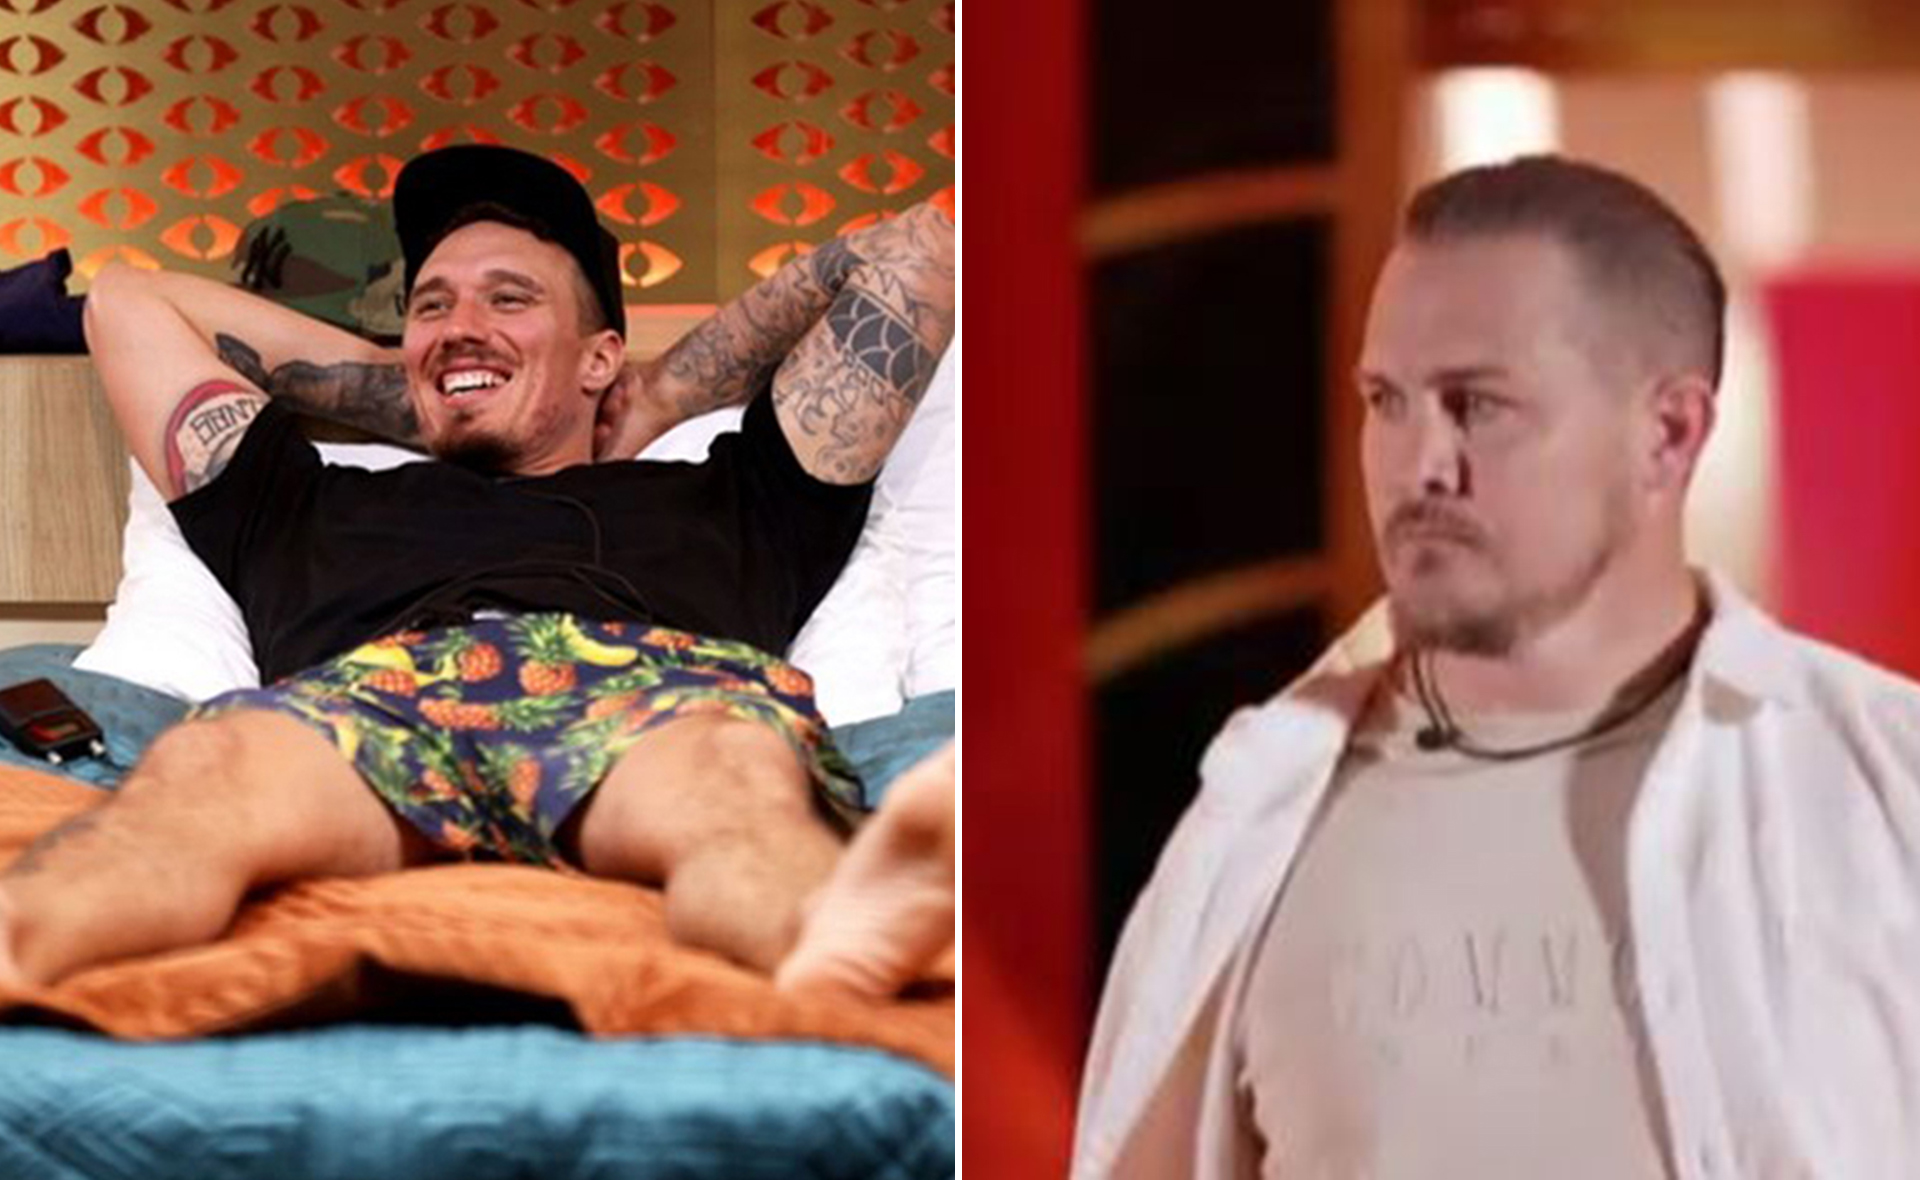 EXCLUSIVE: Big Brother VIP star Matt Cooper claims Luke Toki blindsided him to get more camera time: “What kind of bloke does that?”